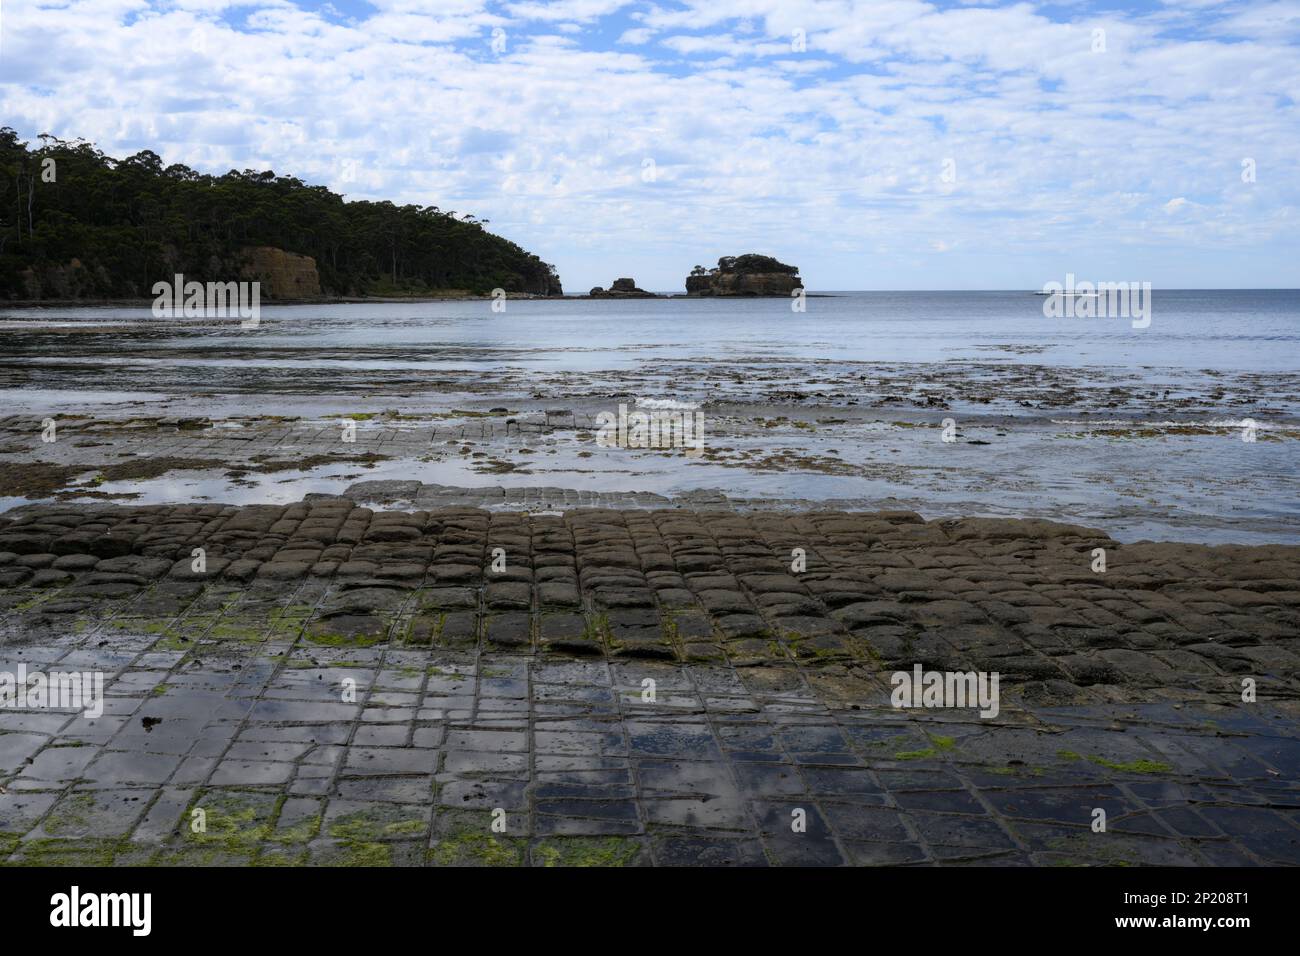 Tessellated pavements at Eaglehawk Neck Bay and Clyde Island,  Tasman Peninsula, a remarkable geological feature with geometric rock formations. Stock Photo